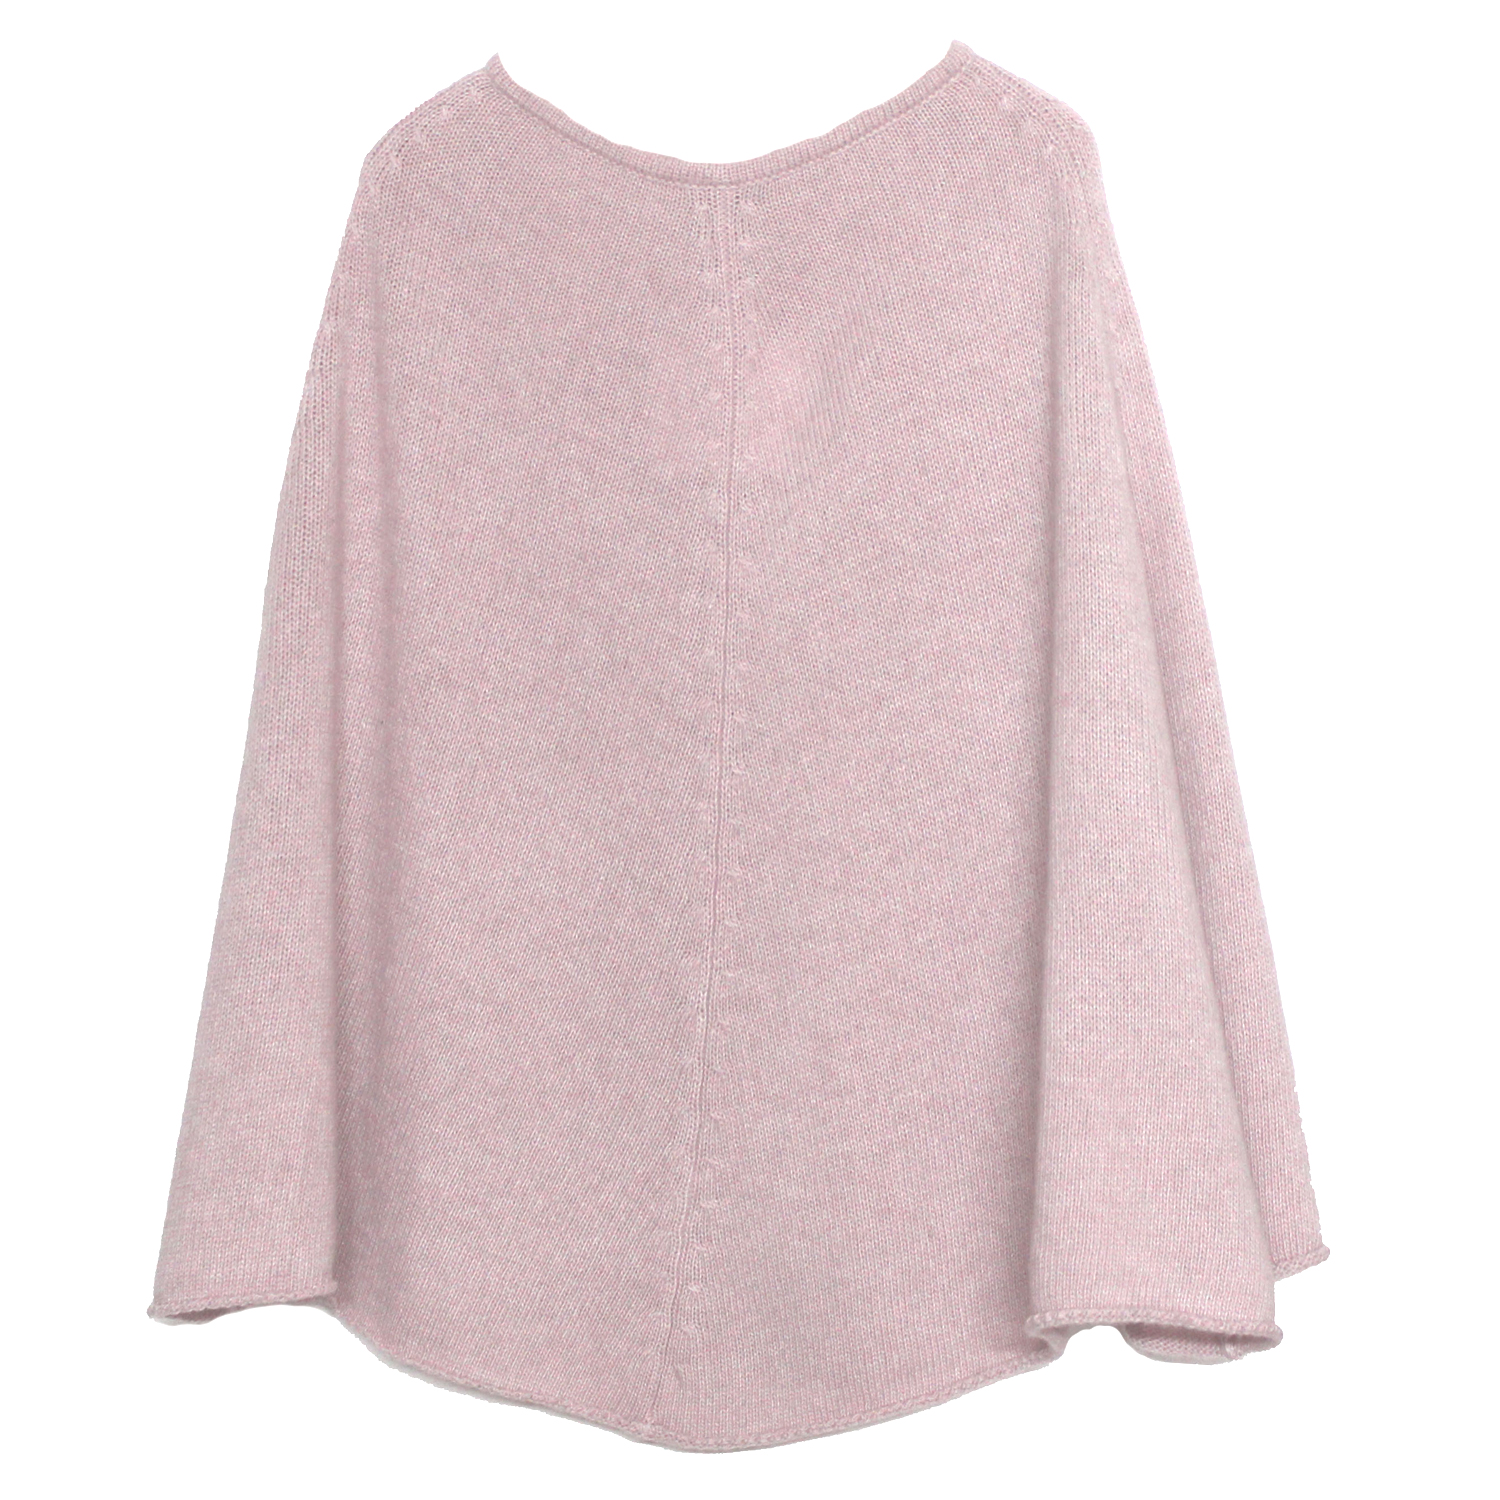 Poncho fille rose 4/6 ans